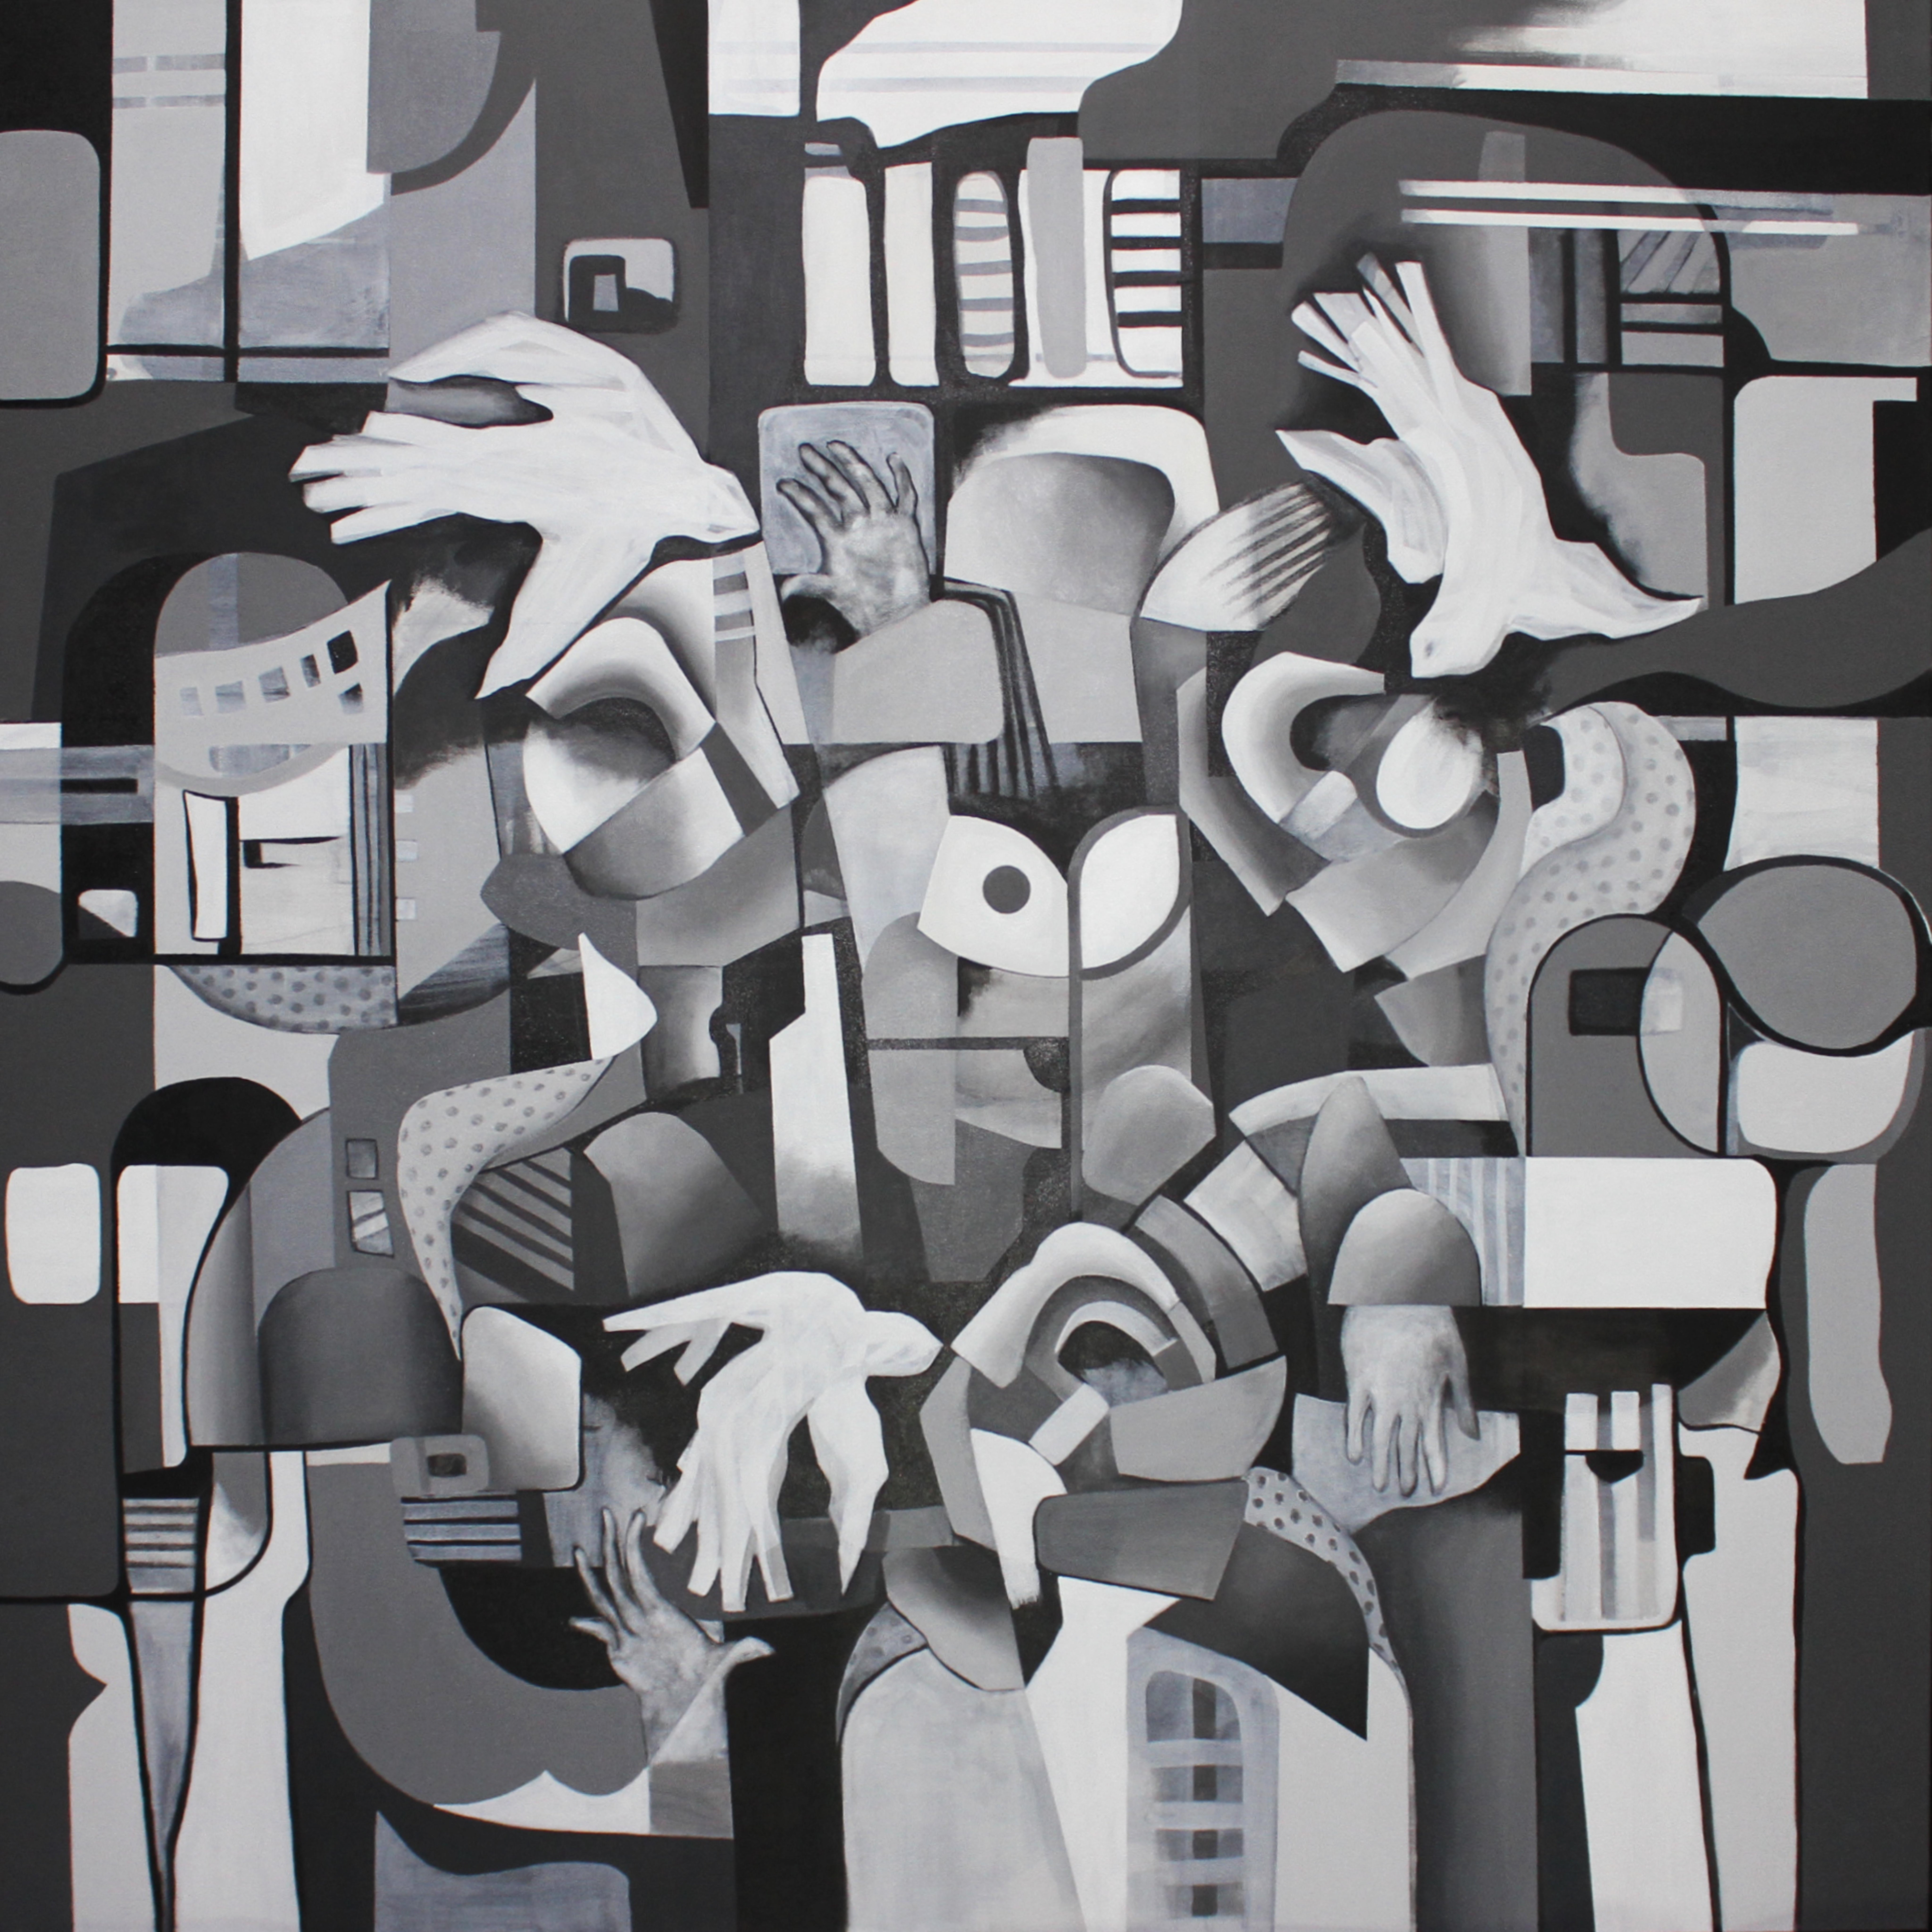 'Meeting on a Street' by Janet Hagopian is a contemporary abstract painting. Artist's work is largely built around patterns and geometrical elements, creating symmetry and order in her paintings. Black and white, graphic artwork has figurative